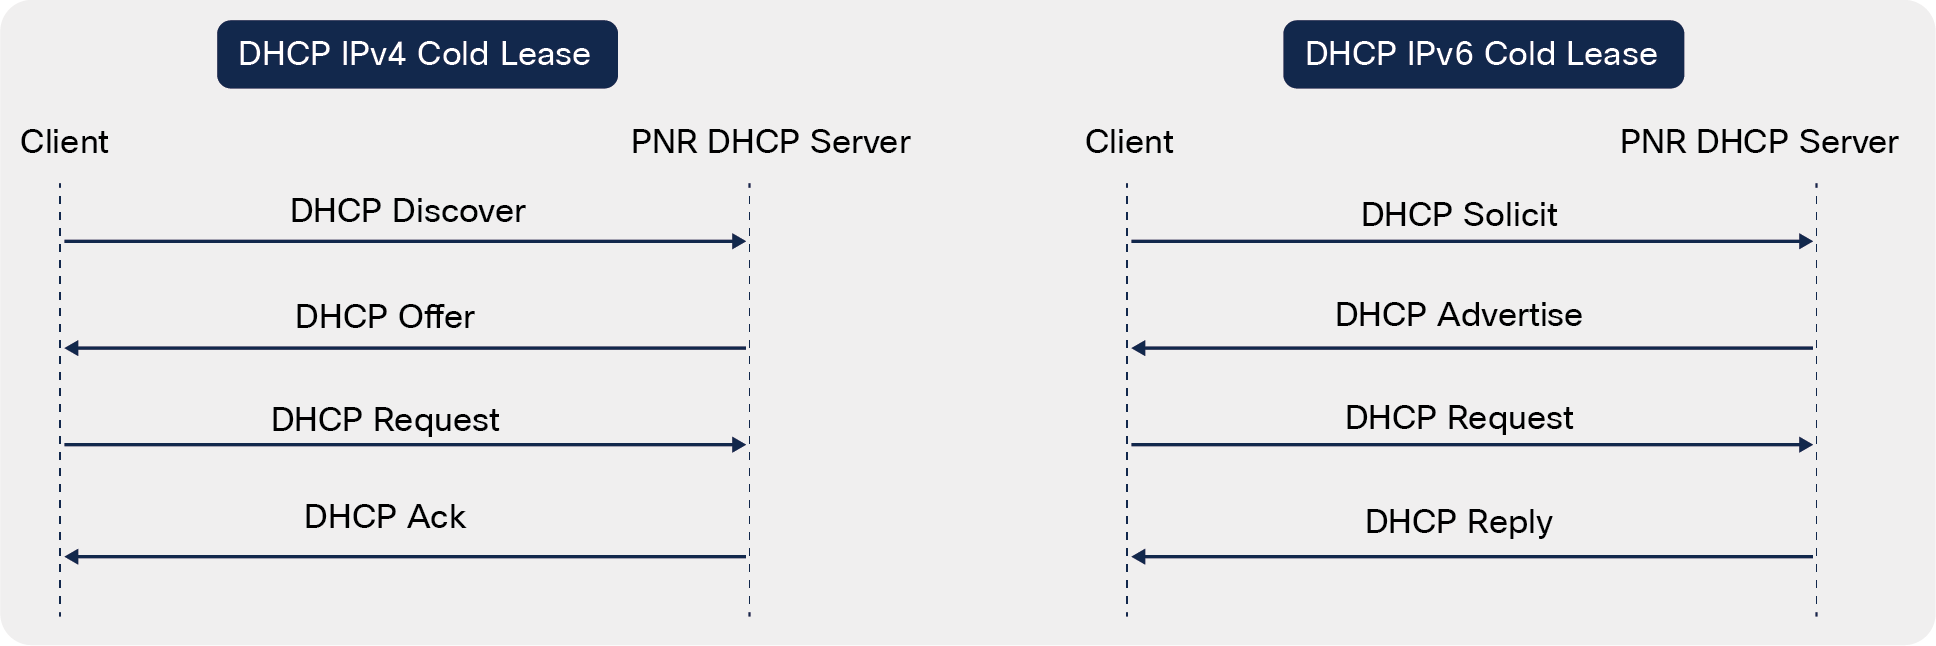 Standard DHCP call flows